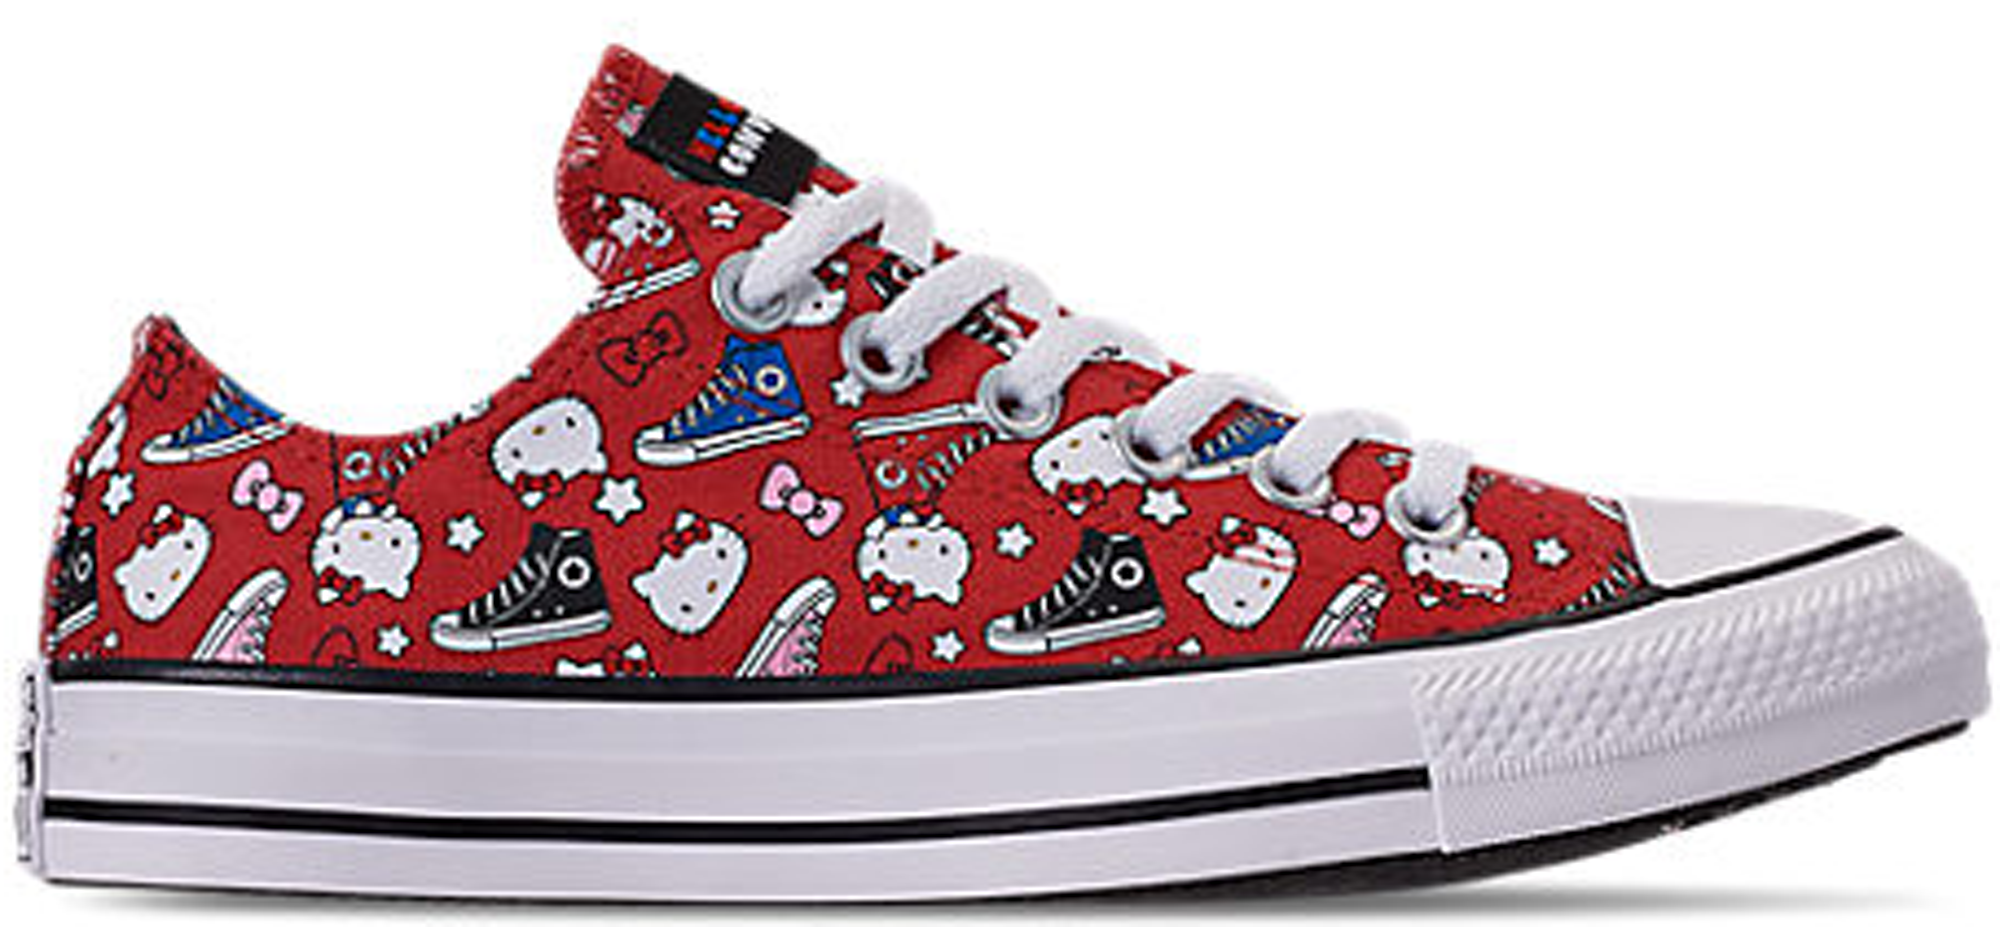 converse hello kitty red